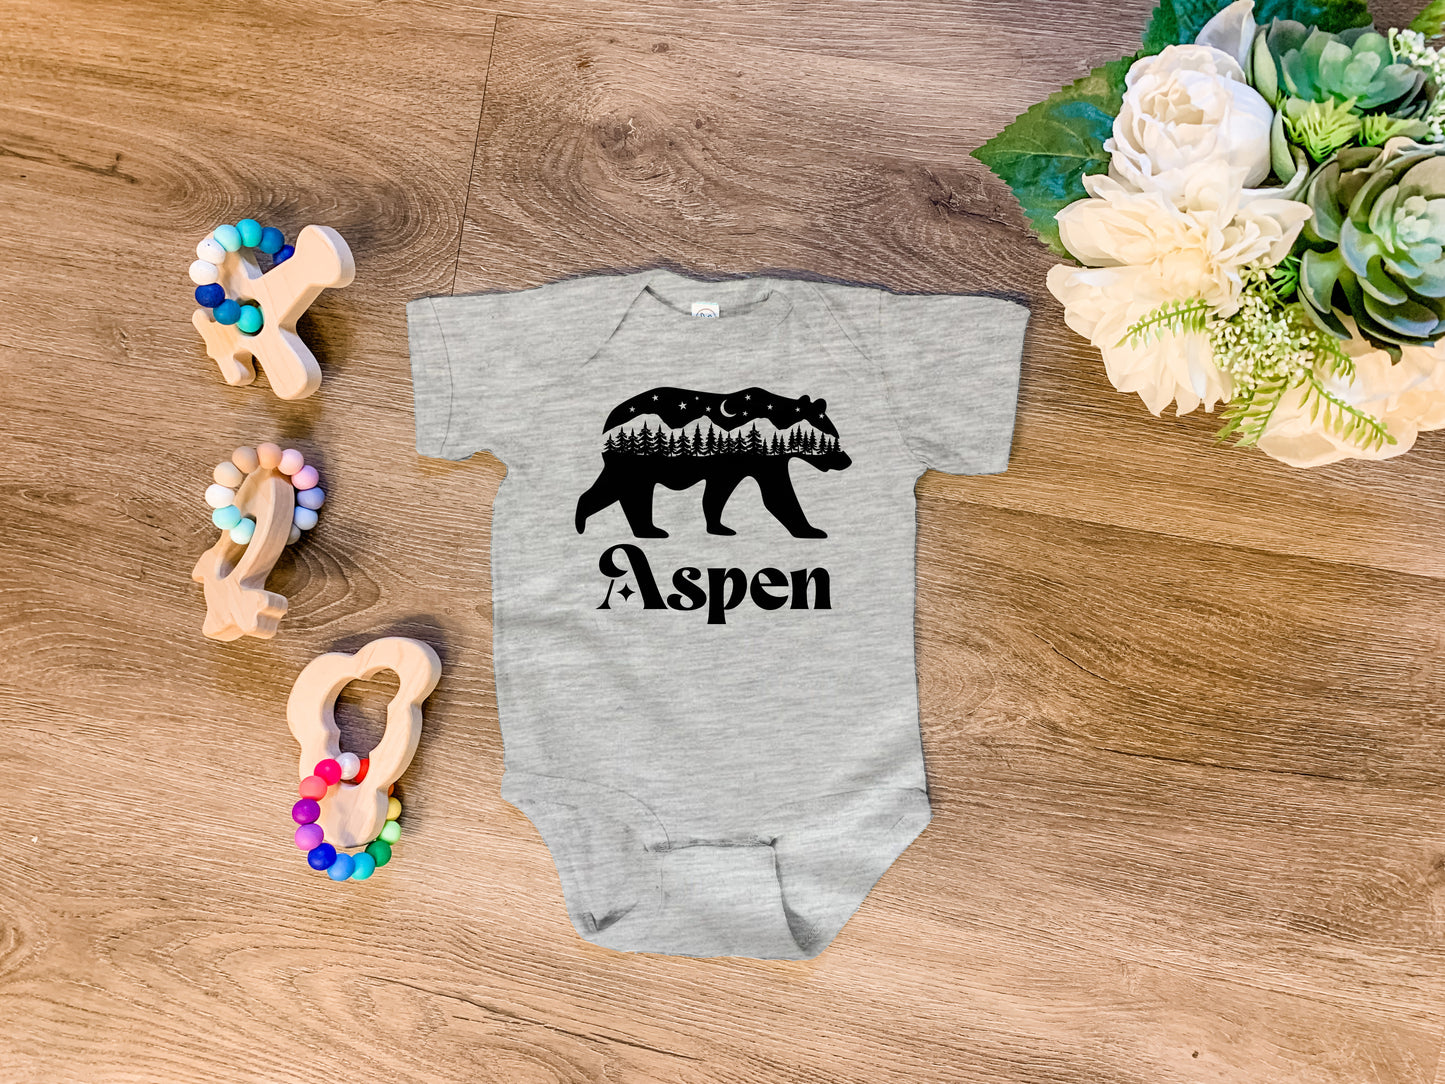 a baby bodysuit with a bear and trees on it